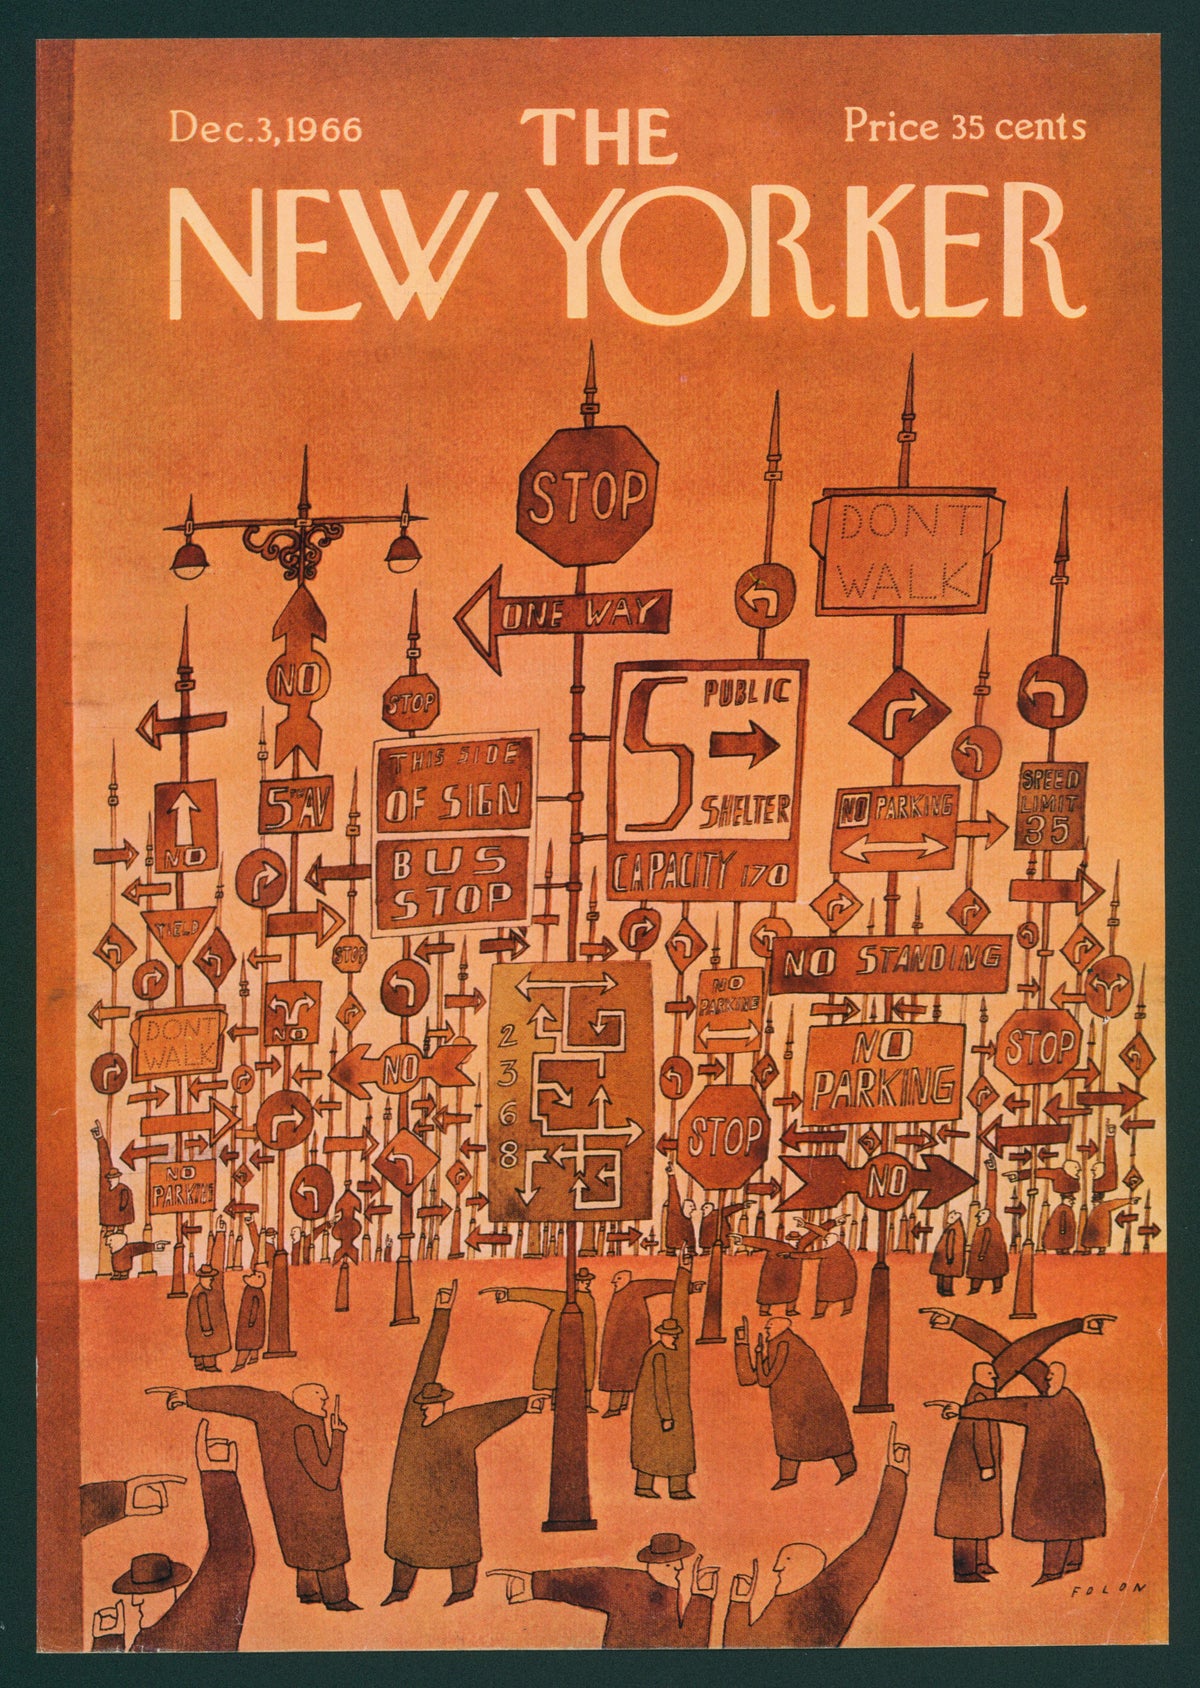 Follow the Signs- The New Yorker - Authentic Vintage Antique Print